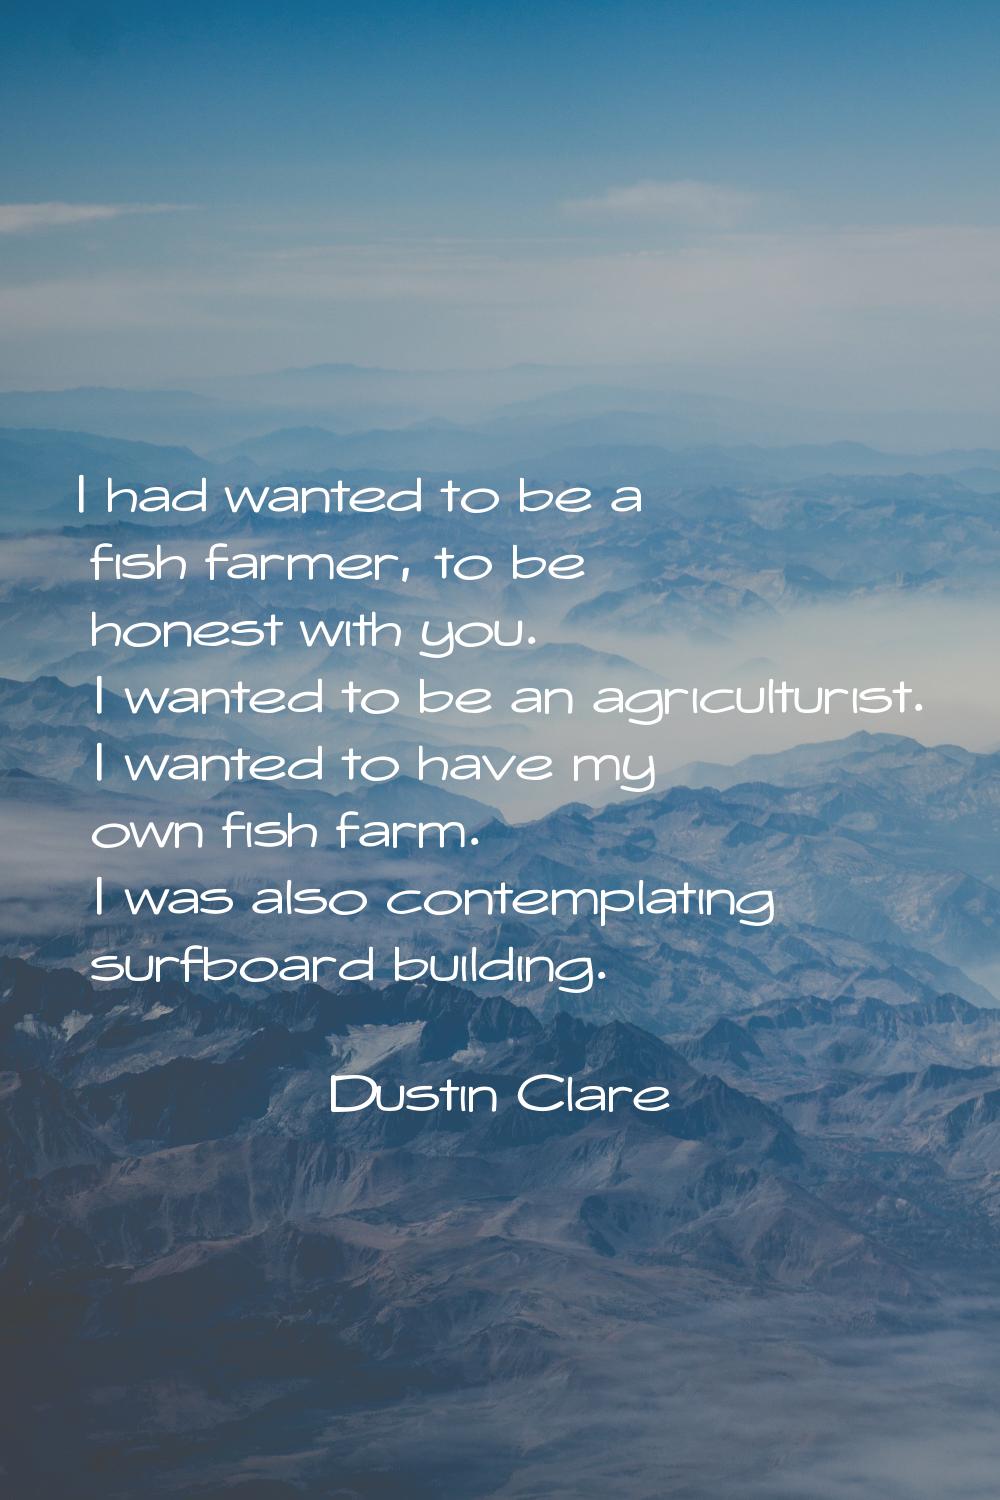 I had wanted to be a fish farmer, to be honest with you. I wanted to be an agriculturist. I wanted 